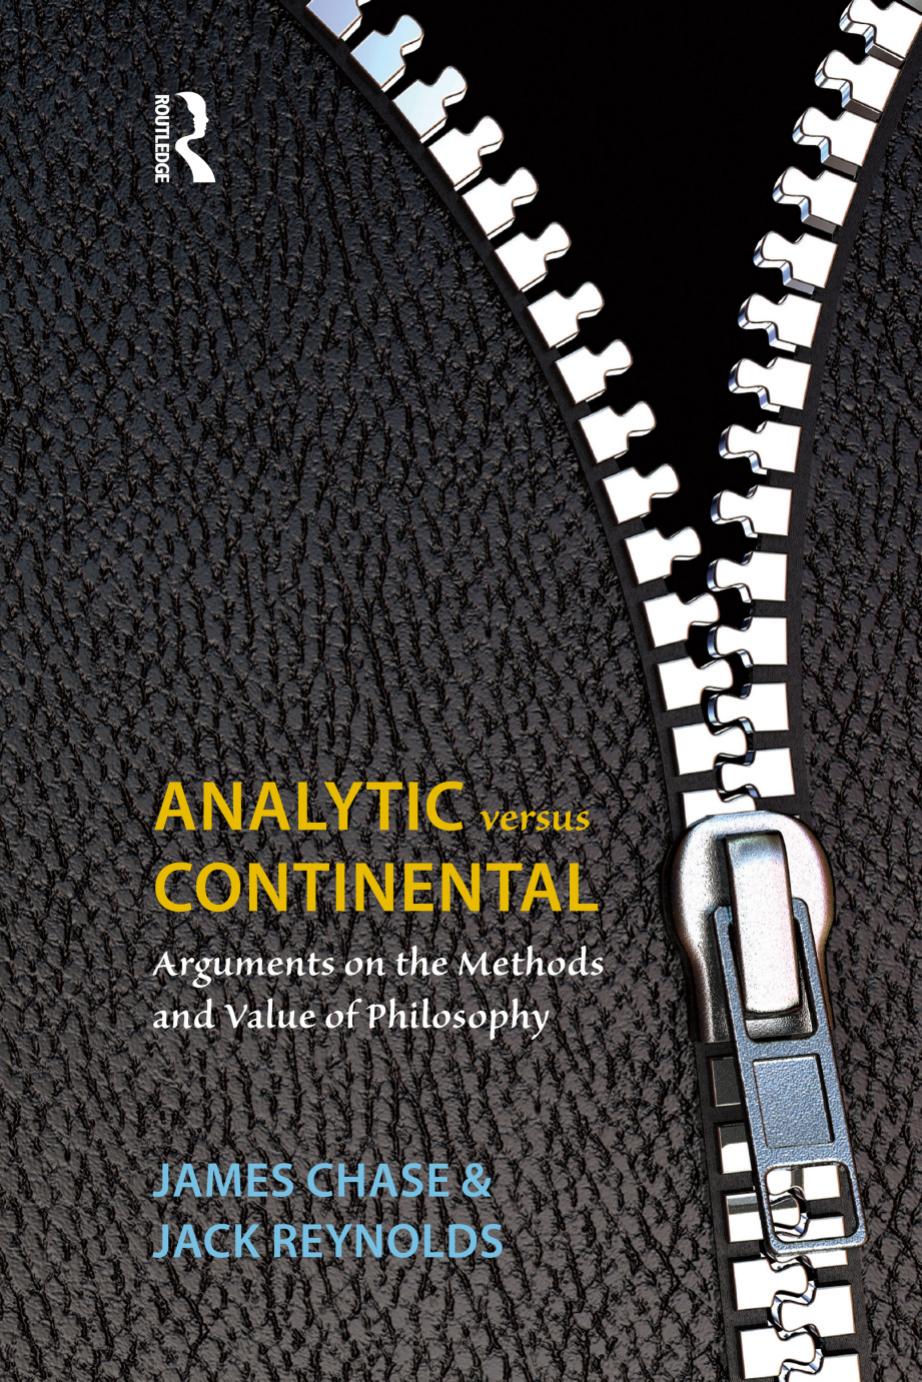 Analytic Versus Continental: Arguments on the Methods and Value of Philosophy by James Chase Jack Reynolds